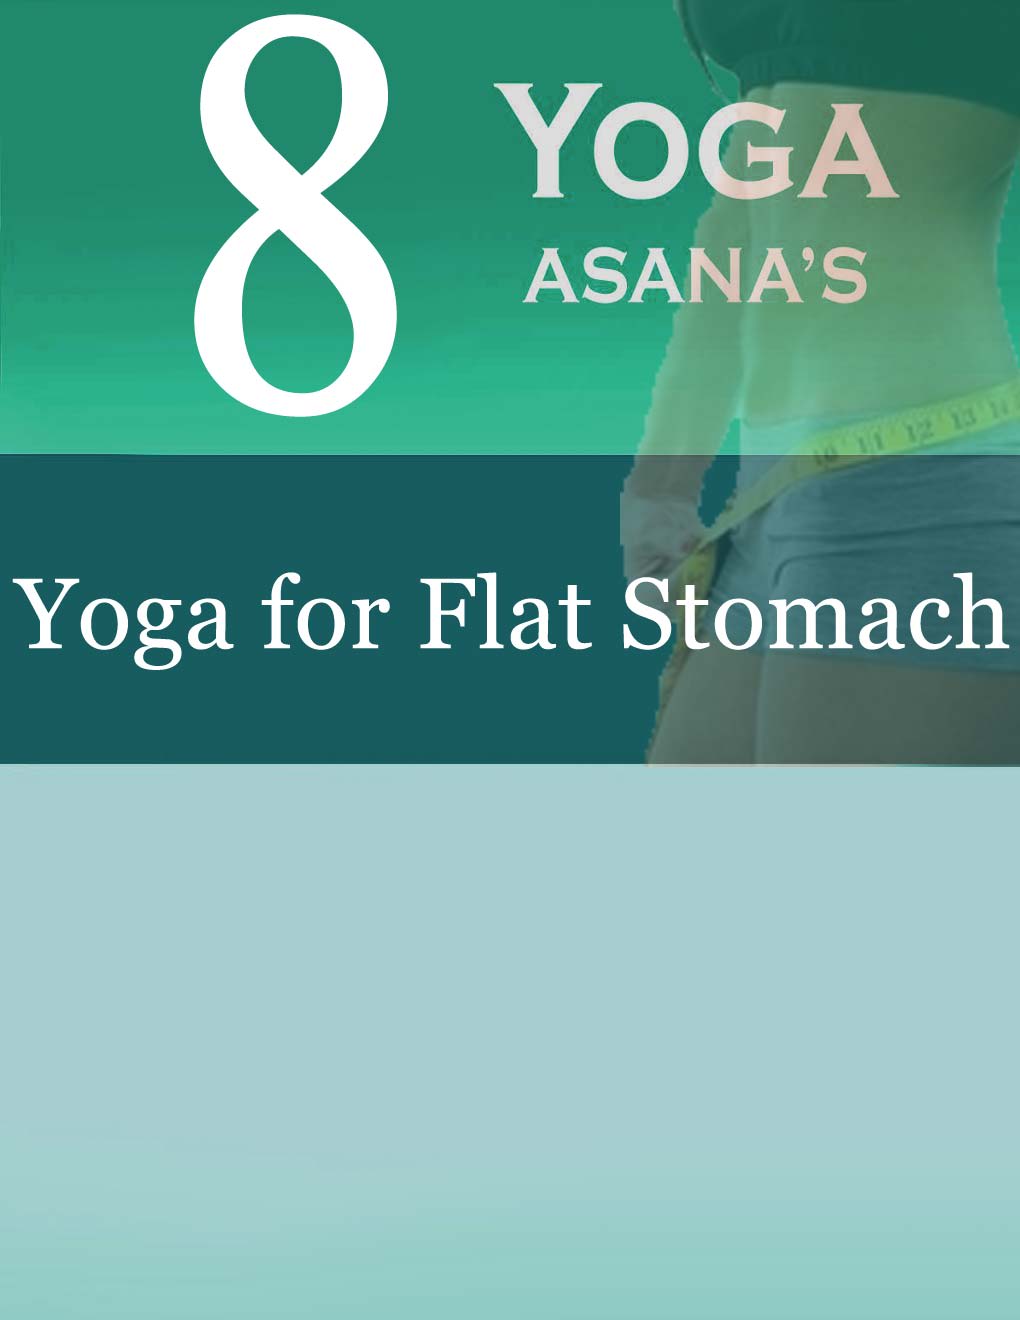 Yoga For Weight Loss: 5 Best Asanas To Lose Belly Fat | TheHealthSite.com